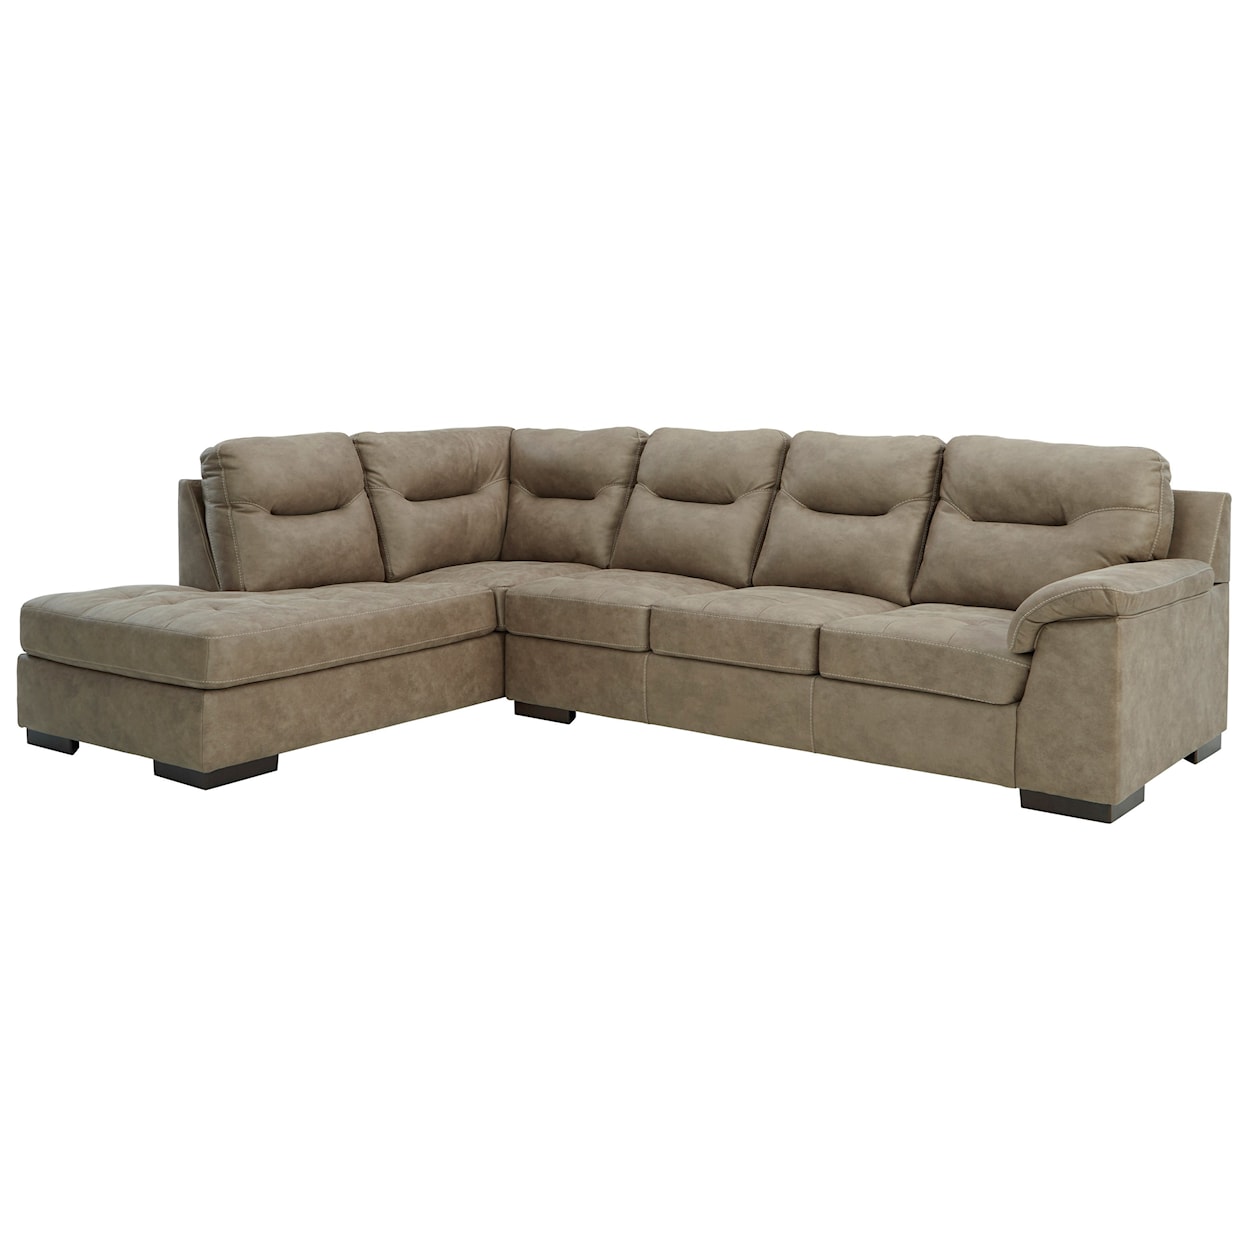 Ashley Furniture Signature Design Maderla 2-Piece Sectional with Chaise